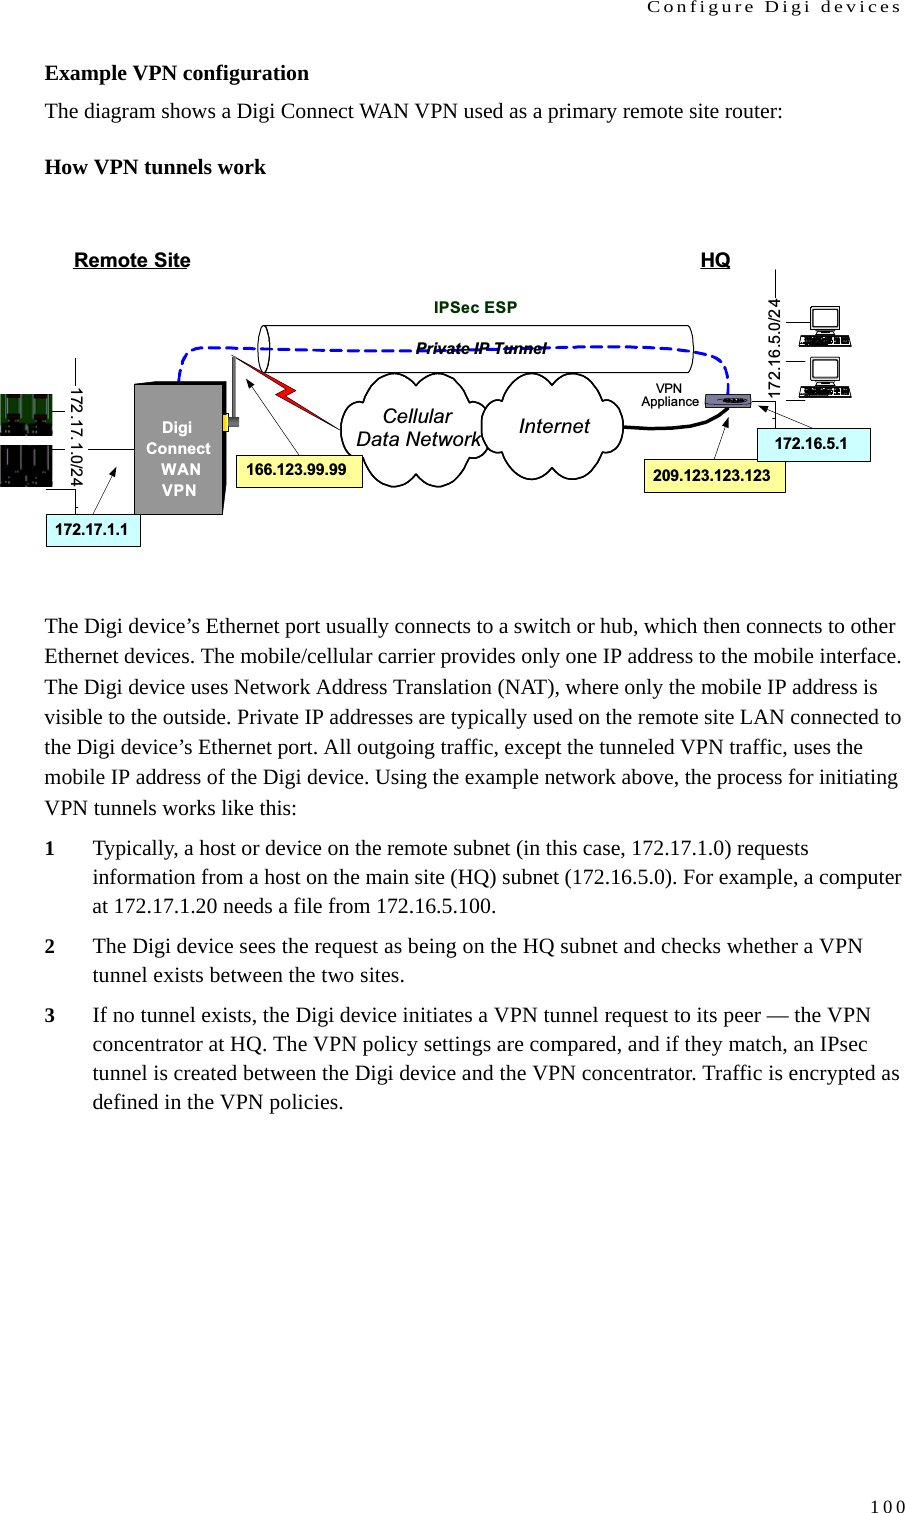 Configure Digi devices100Example VPN configurationThe diagram shows a Digi Connect WAN VPN used as a primary remote site router:How VPN tunnels workThe Digi device’s Ethernet port usually connects to a switch or hub, which then connects to other Ethernet devices. The mobile/cellular carrier provides only one IP address to the mobile interface. The Digi device uses Network Address Translation (NAT), where only the mobile IP address is visible to the outside. Private IP addresses are typically used on the remote site LAN connected to the Digi device’s Ethernet port. All outgoing traffic, except the tunneled VPN traffic, uses the mobile IP address of the Digi device. Using the example network above, the process for initiating VPN tunnels works like this:1Typically, a host or device on the remote subnet (in this case, 172.17.1.0) requests information from a host on the main site (HQ) subnet (172.16.5.0). For example, a computer at 172.17.1.20 needs a file from 172.16.5.100. 2The Digi device sees the request as being on the HQ subnet and checks whether a VPN tunnel exists between the two sites.3If no tunnel exists, the Digi device initiates a VPN tunnel request to its peer — the VPN concentrator at HQ. The VPN policy settings are compared, and if they match, an IPsec tunnel is created between the Digi device and the VPN concentrator. Traffic is encrypted as defined in the VPN policies. CellularData NetworkDigiConnectVPNInternetRemote Site HQ166.123.99.99 209.123.123.123PWROKWIC0ACT/CH0ACT/CH1WIC0ACT/CH0ACT/CH1ETHACTCOLVPNAppliance172.16 .5.0/2 4172.17.1.0/24172.17.1.1Private IP Tunnel172.16.5.1IPSec ESPWAN